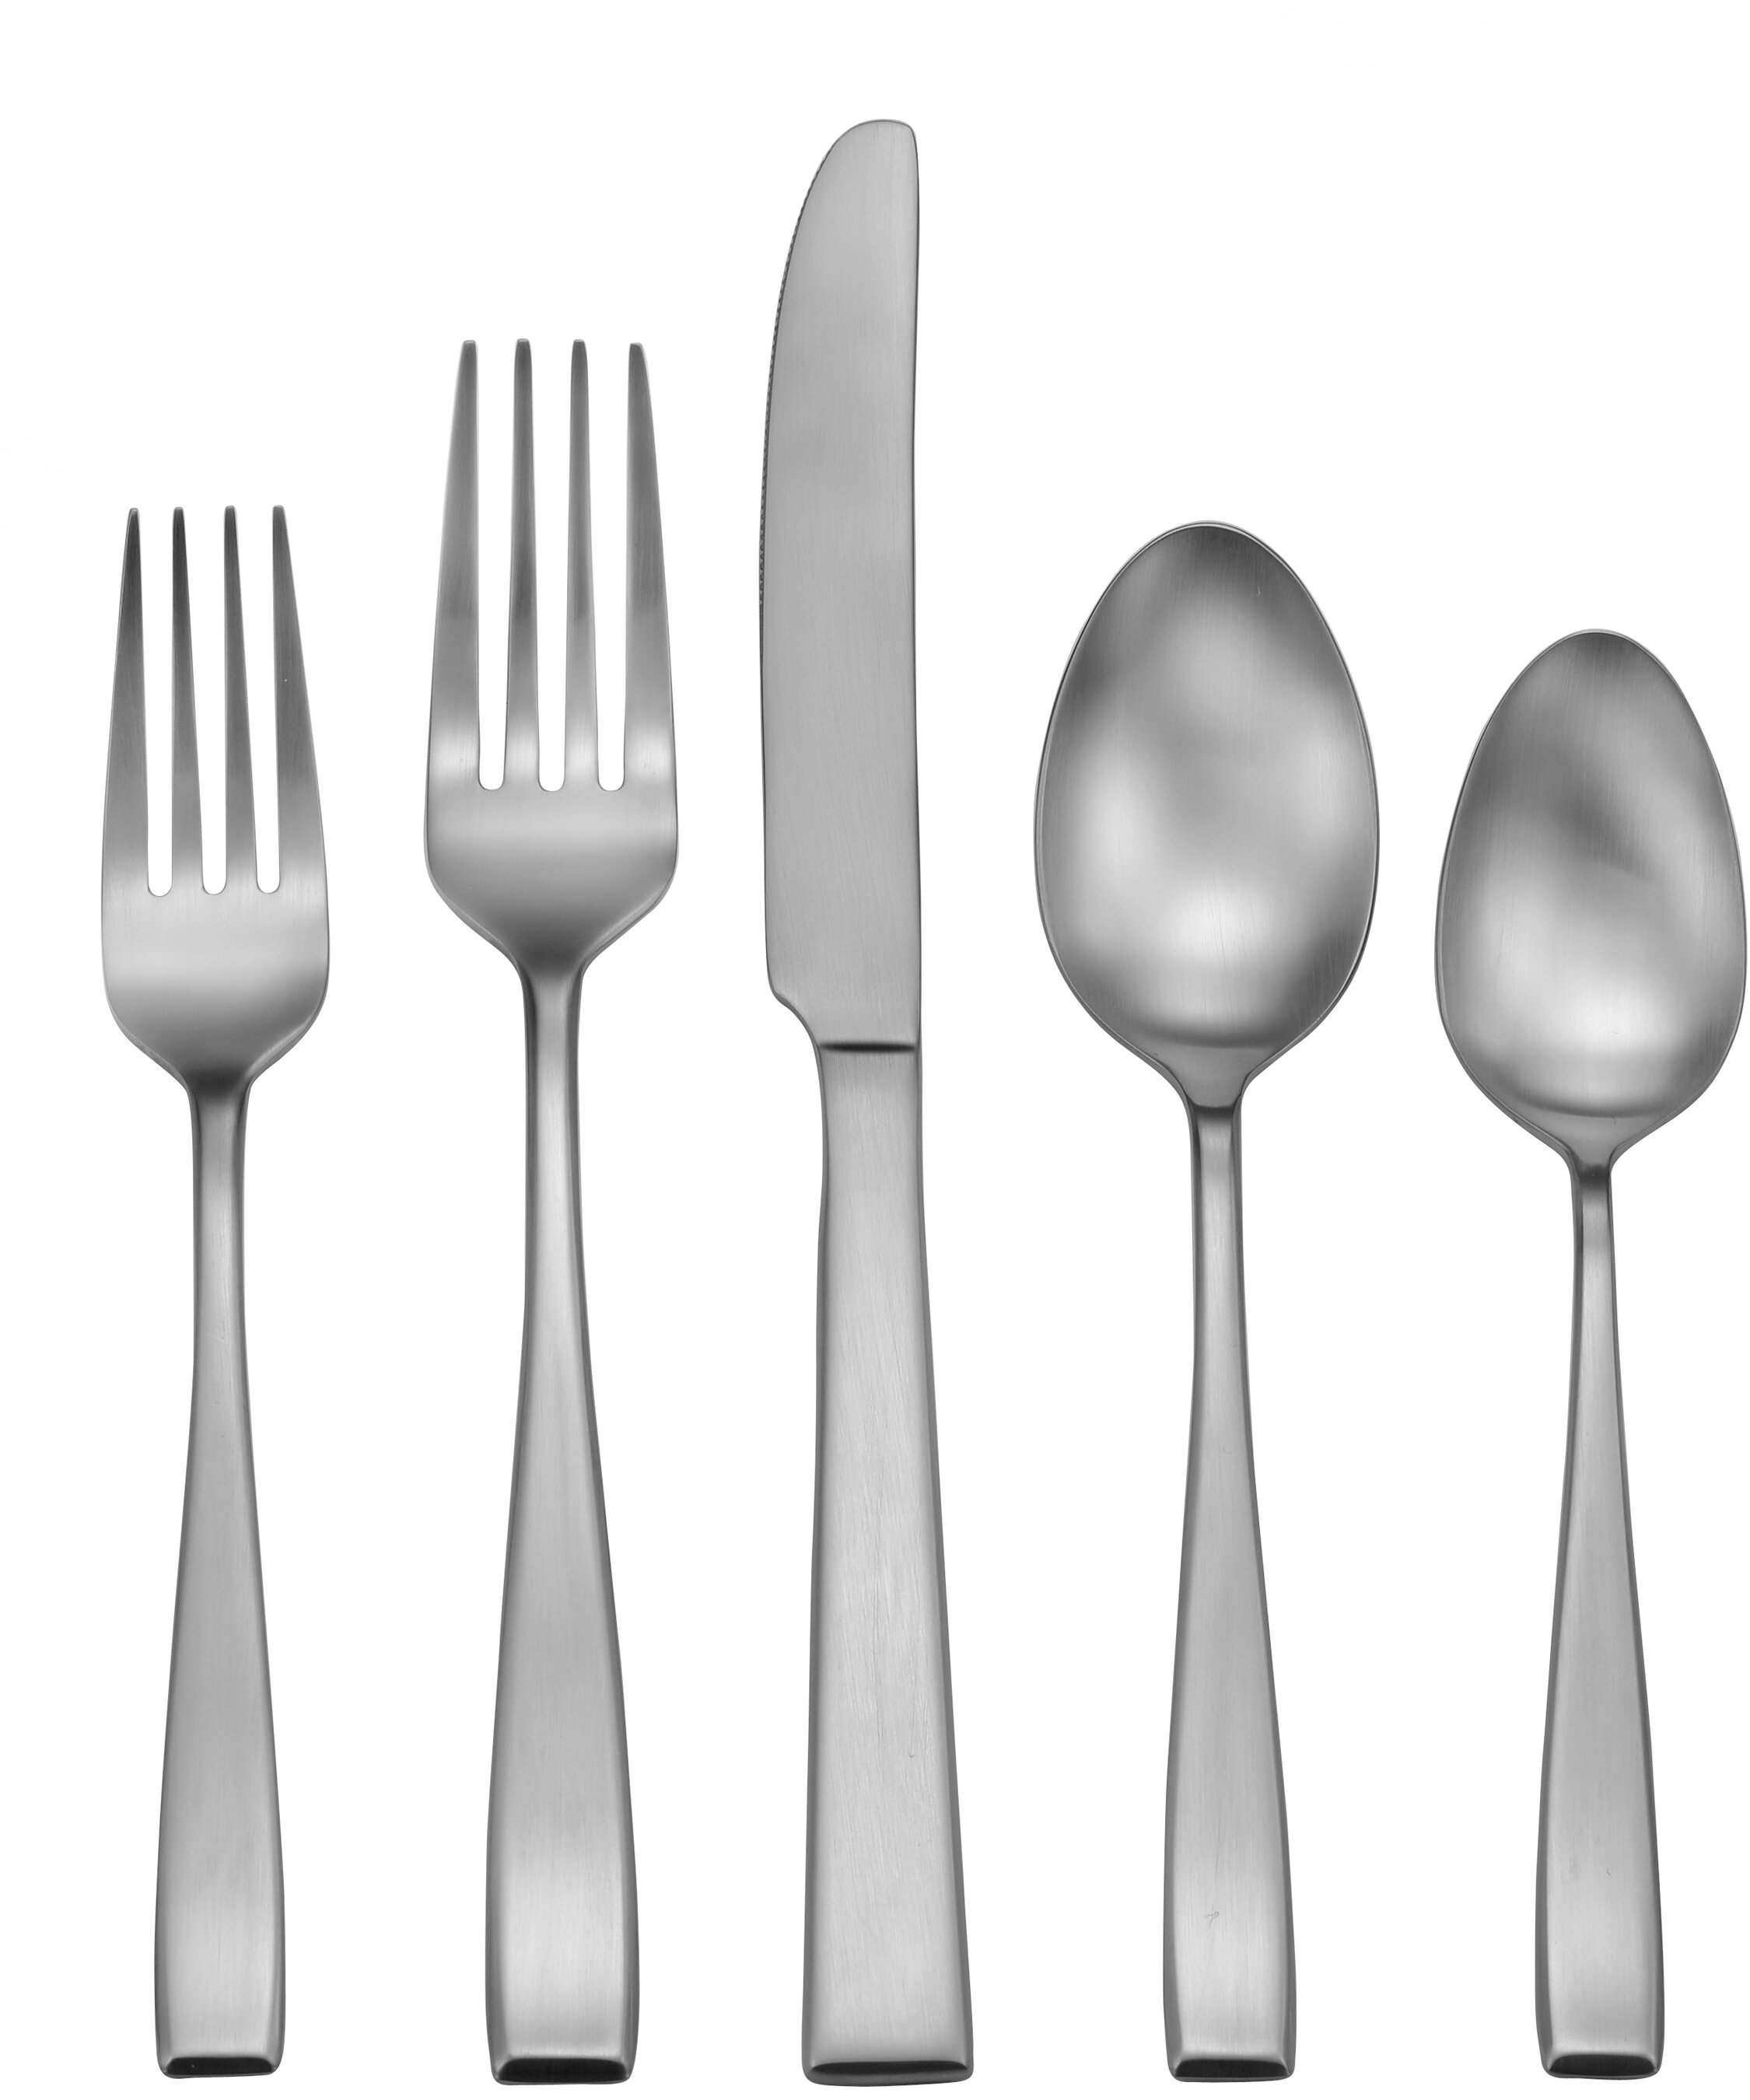 Stainless Steel Silverware Flatware Set for 8 Elegant Cutlery Tableware Includes Fork Spoon Knife LIANYU 46-Piece Silverware Set with Serving Utensils Mirror Polished Dishwasher Safe 